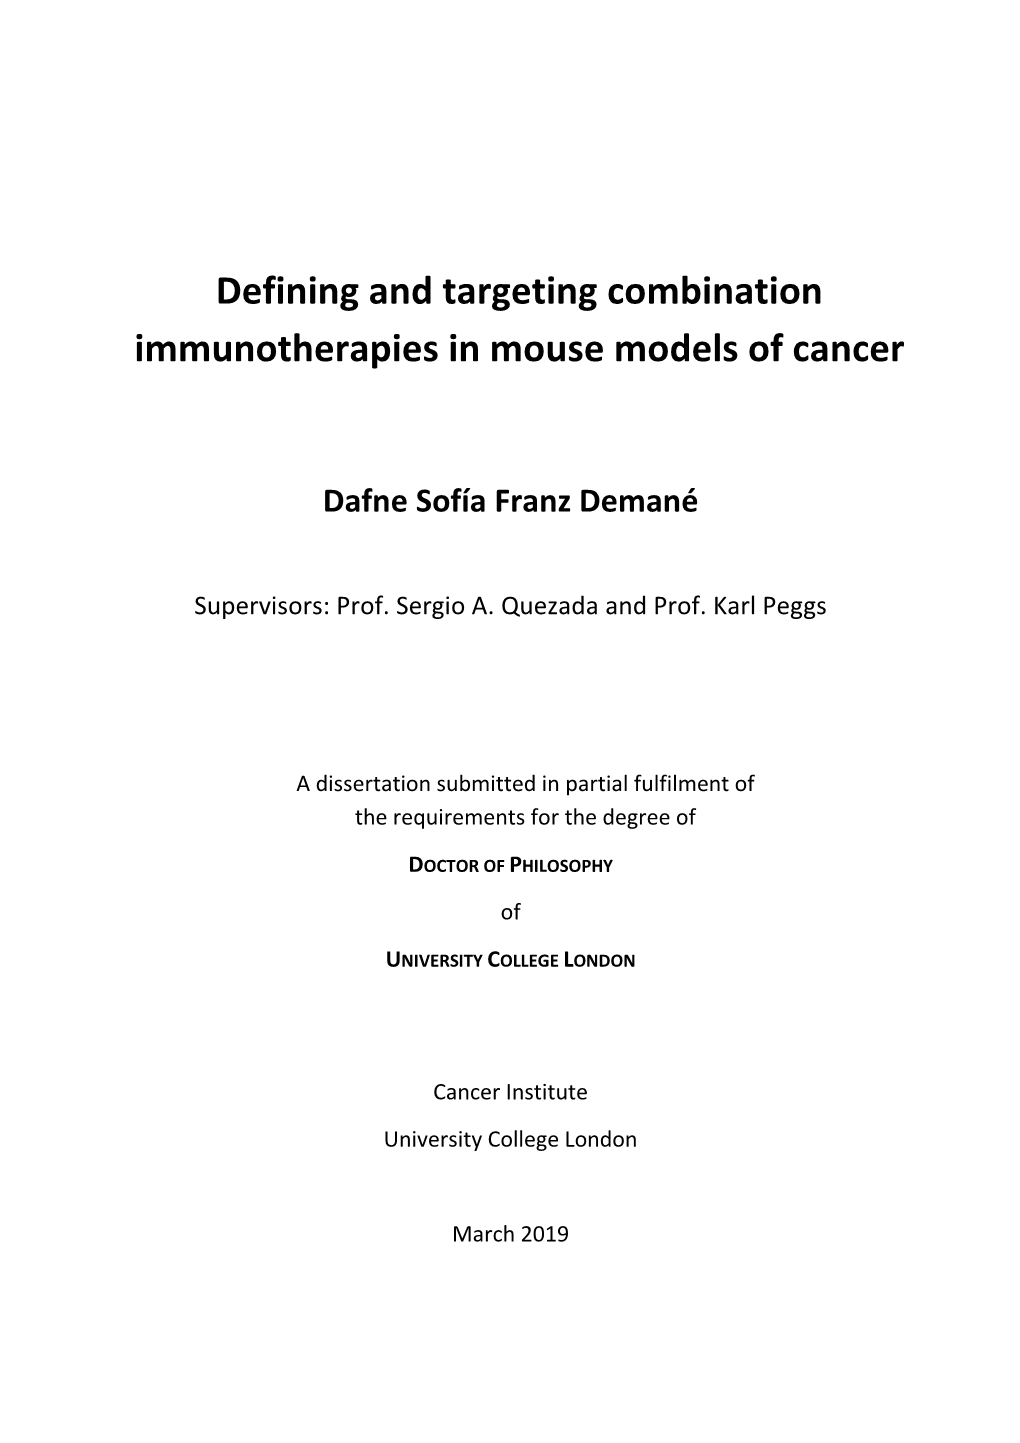 Defining and Targeting Combination Immunotherapies in Mouse Models of Cancer